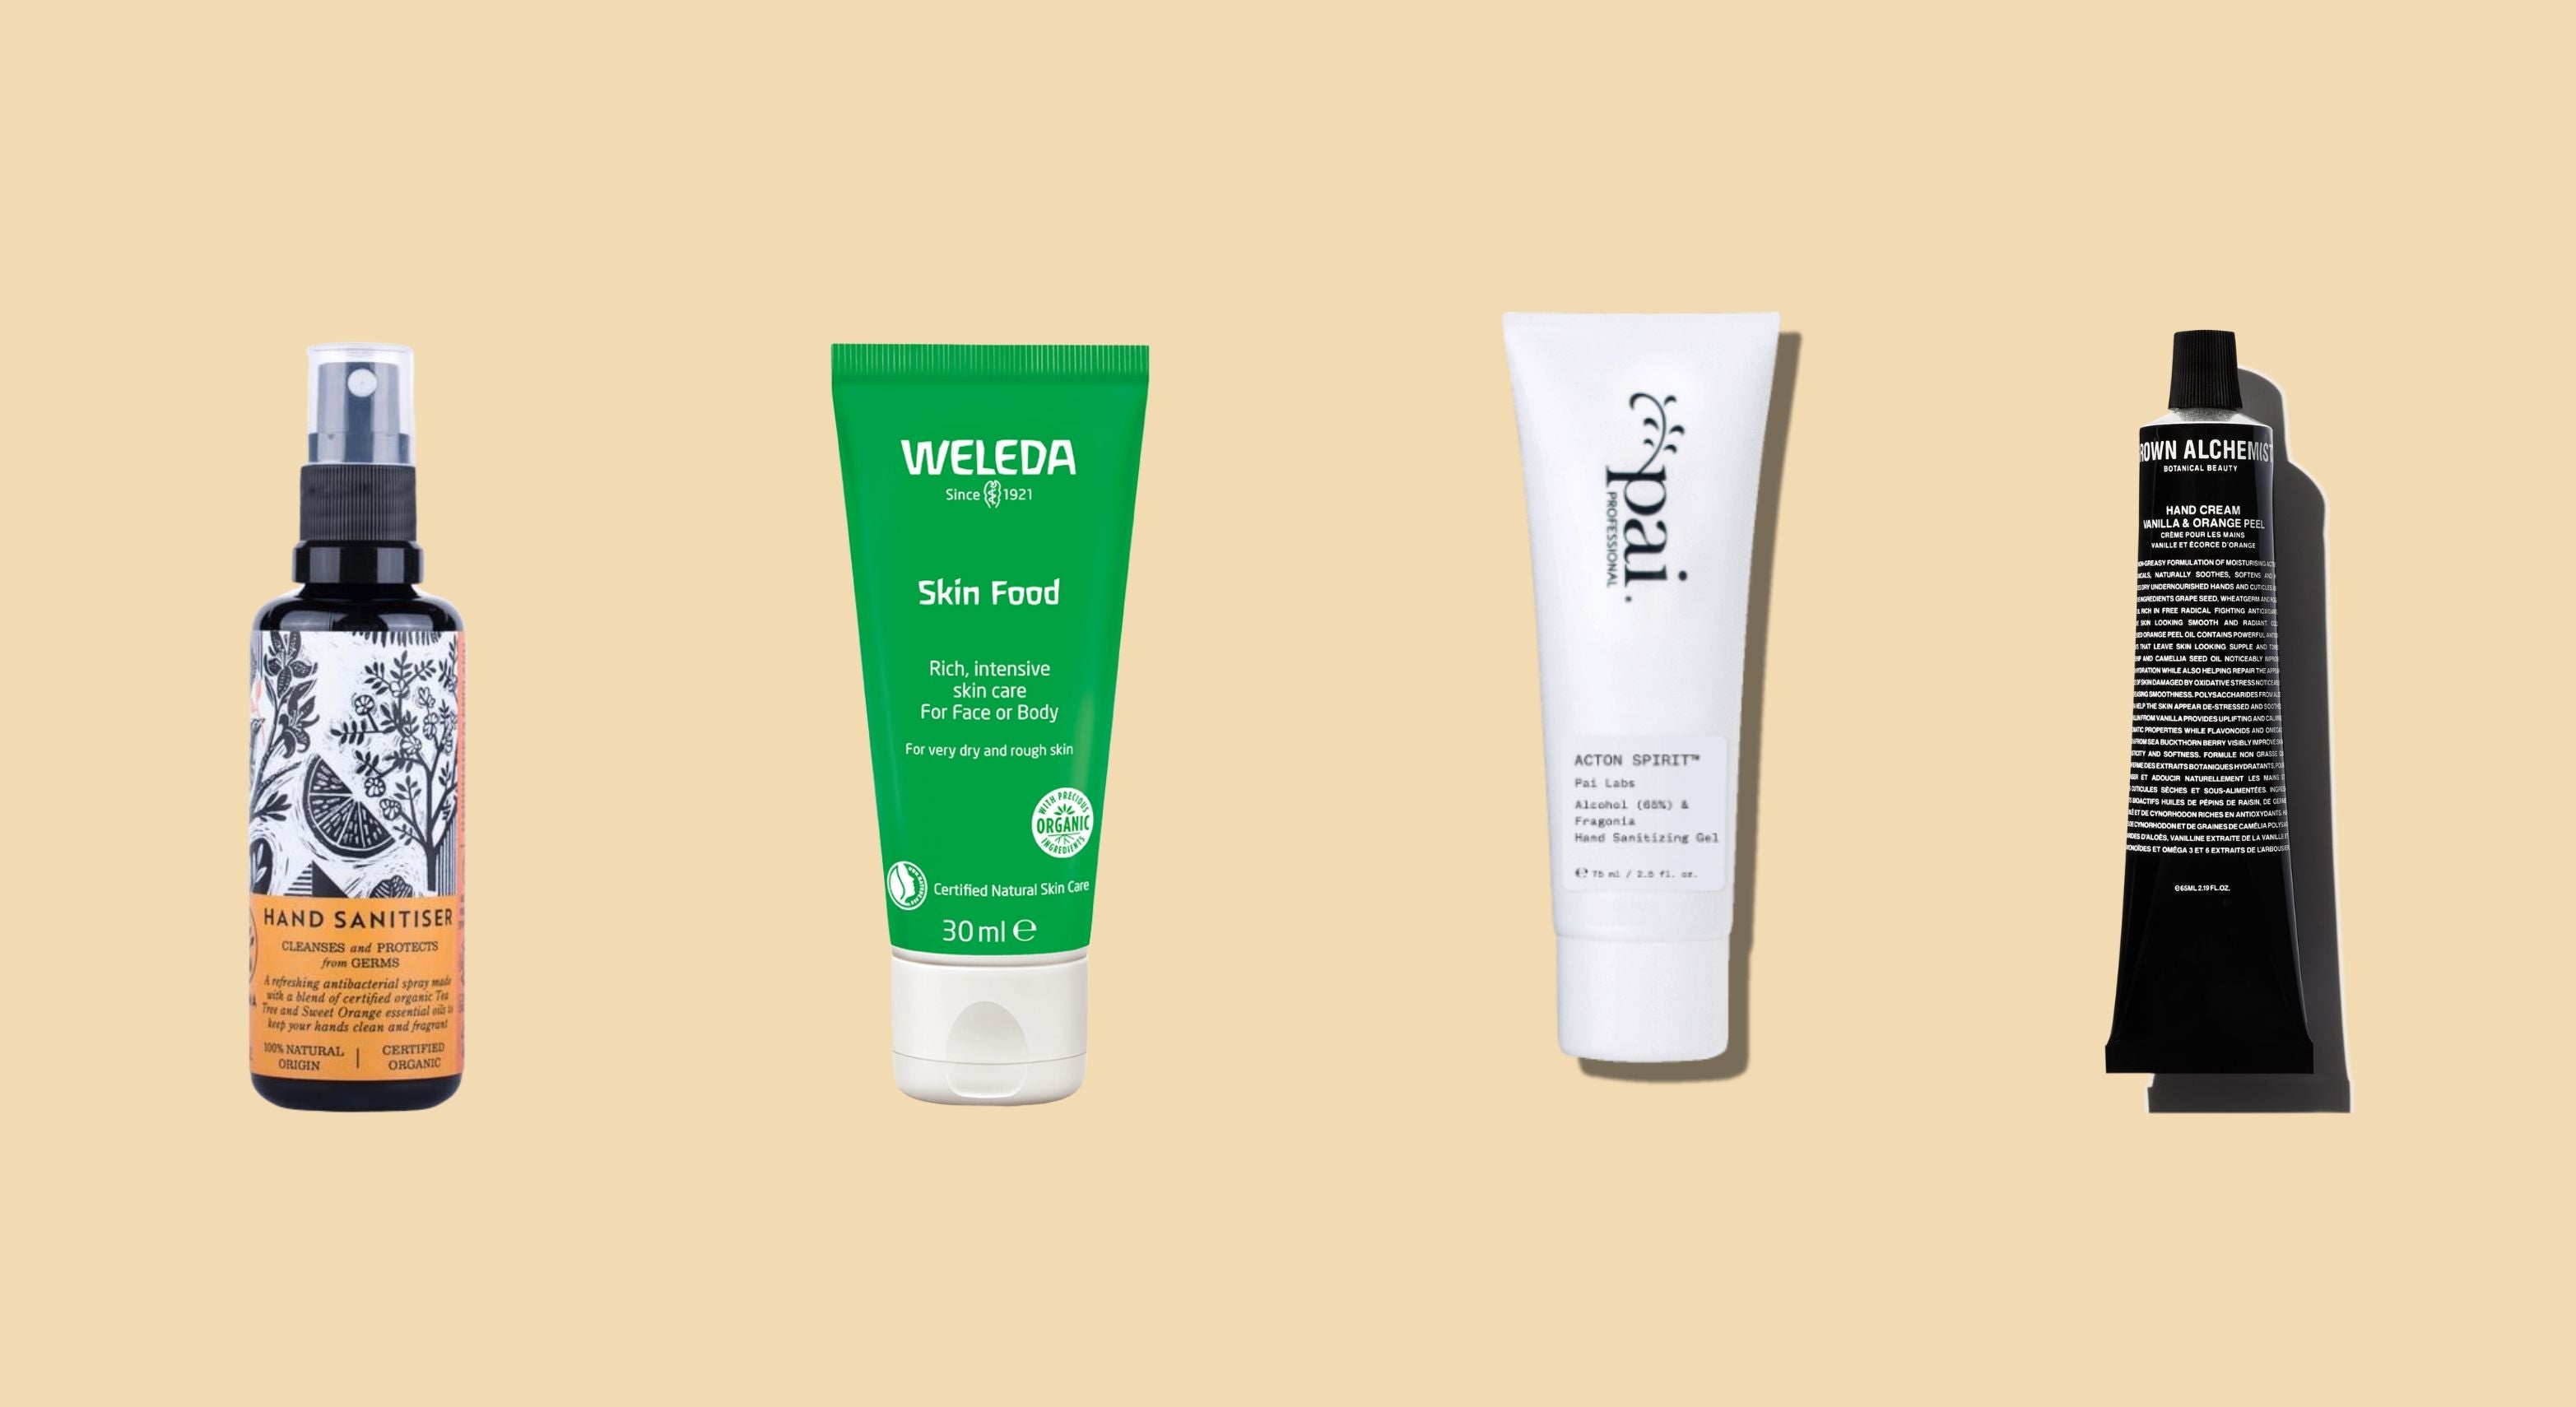 Toxin-Free Hand-Care Products to keep your hands nourished